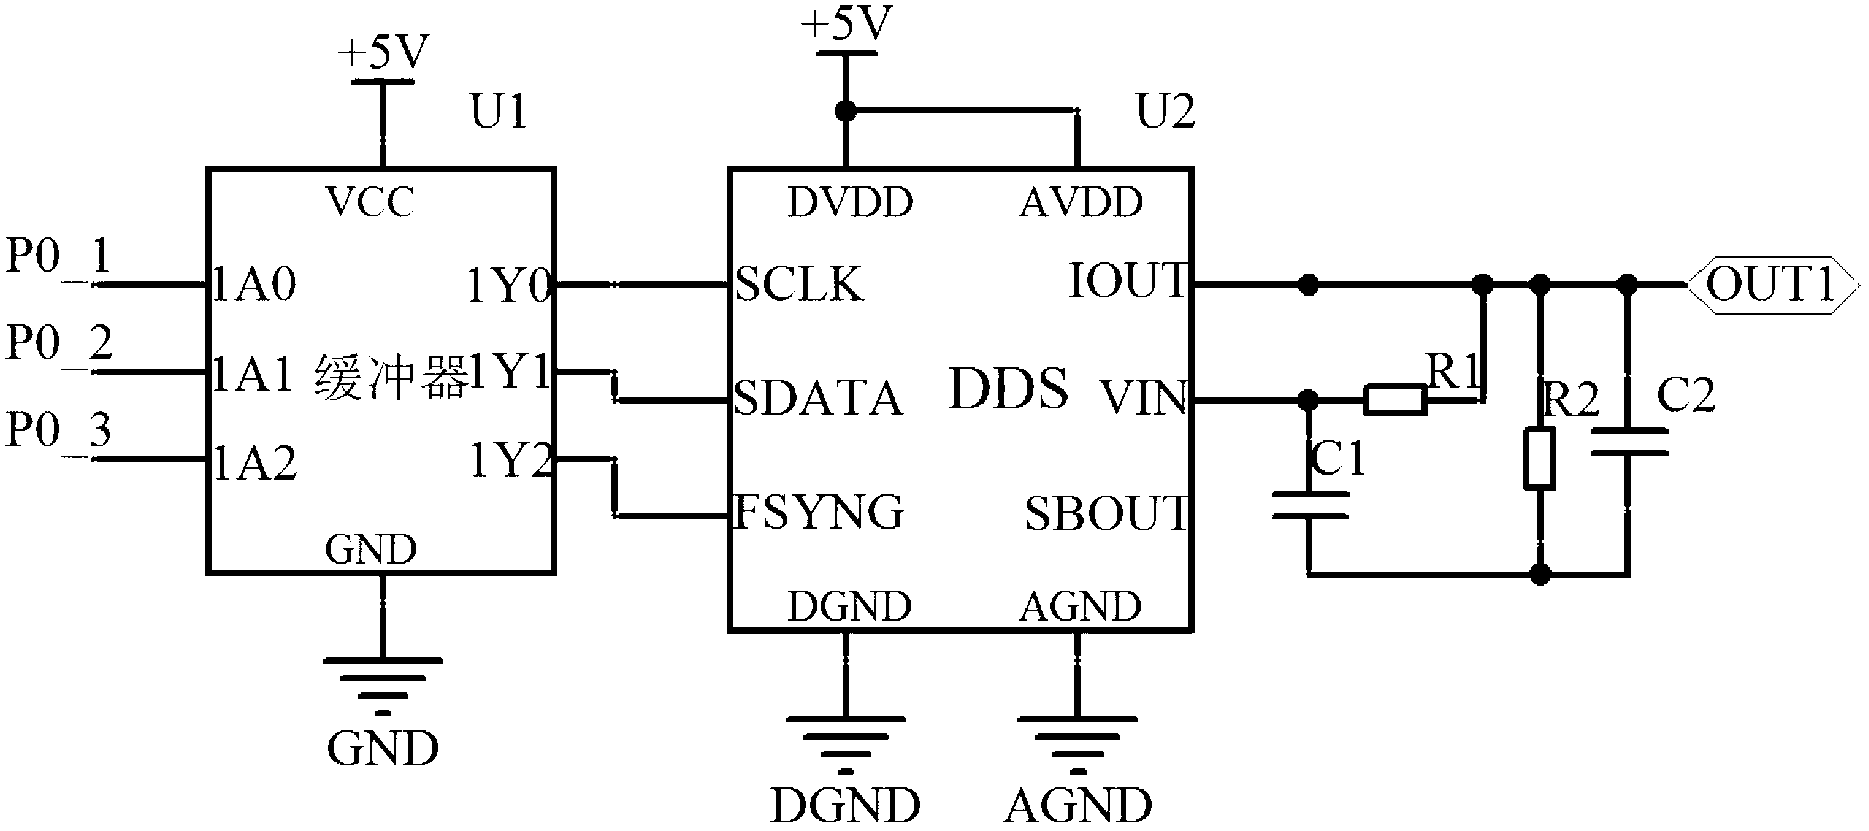 Time delay detection system for signal circuit